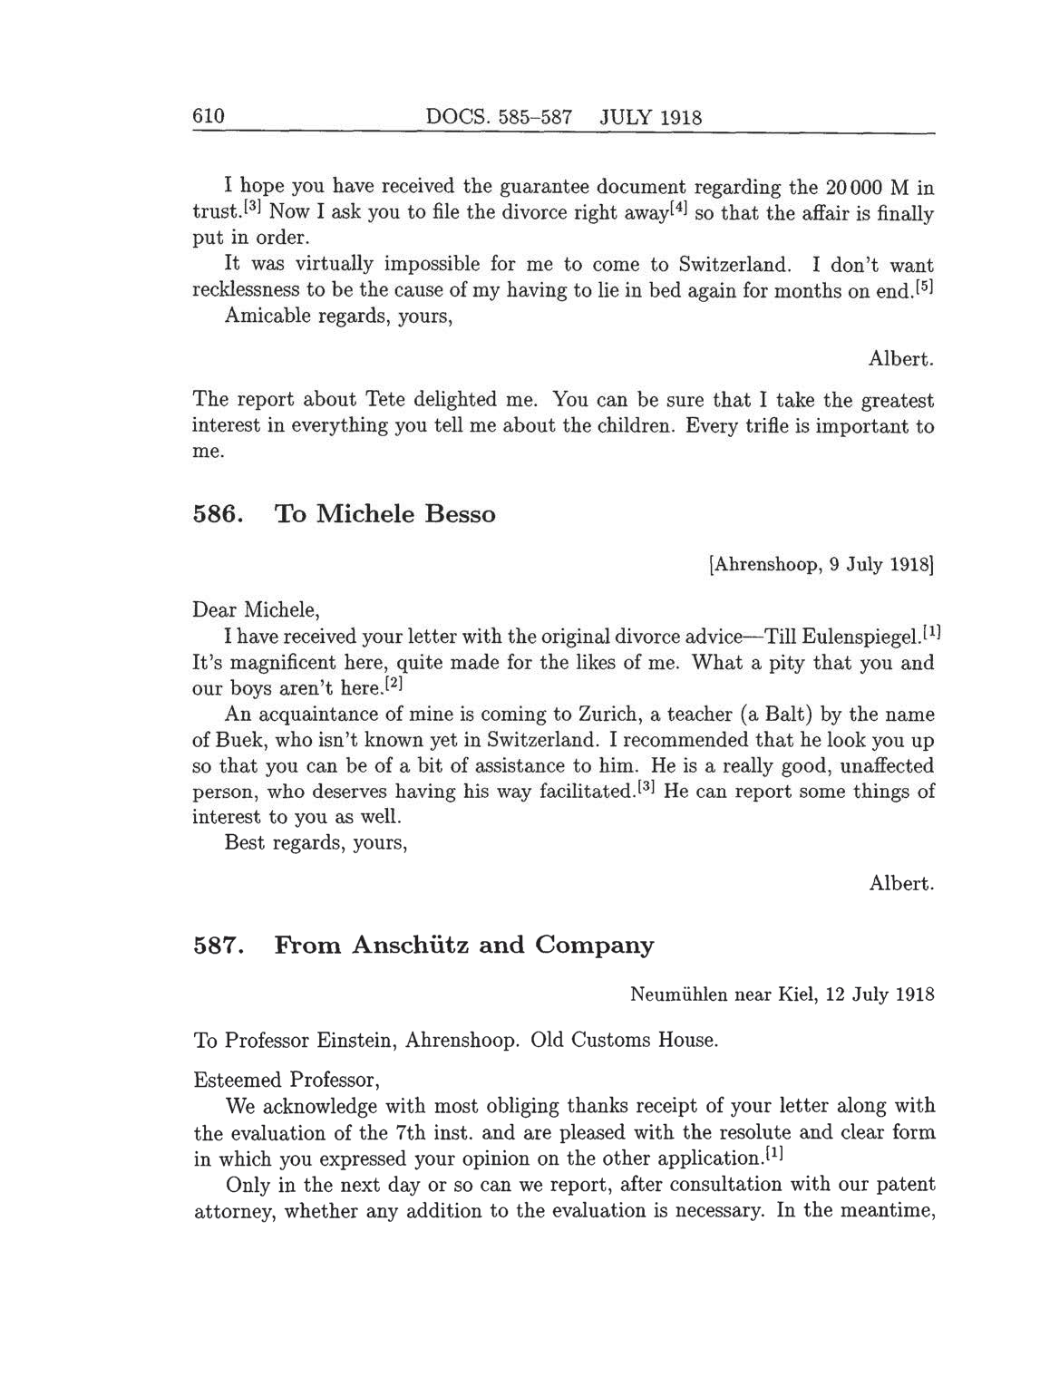 Volume 8: The Berlin Years: Correspondence, 1914-1918 (English translation supplement) page 610